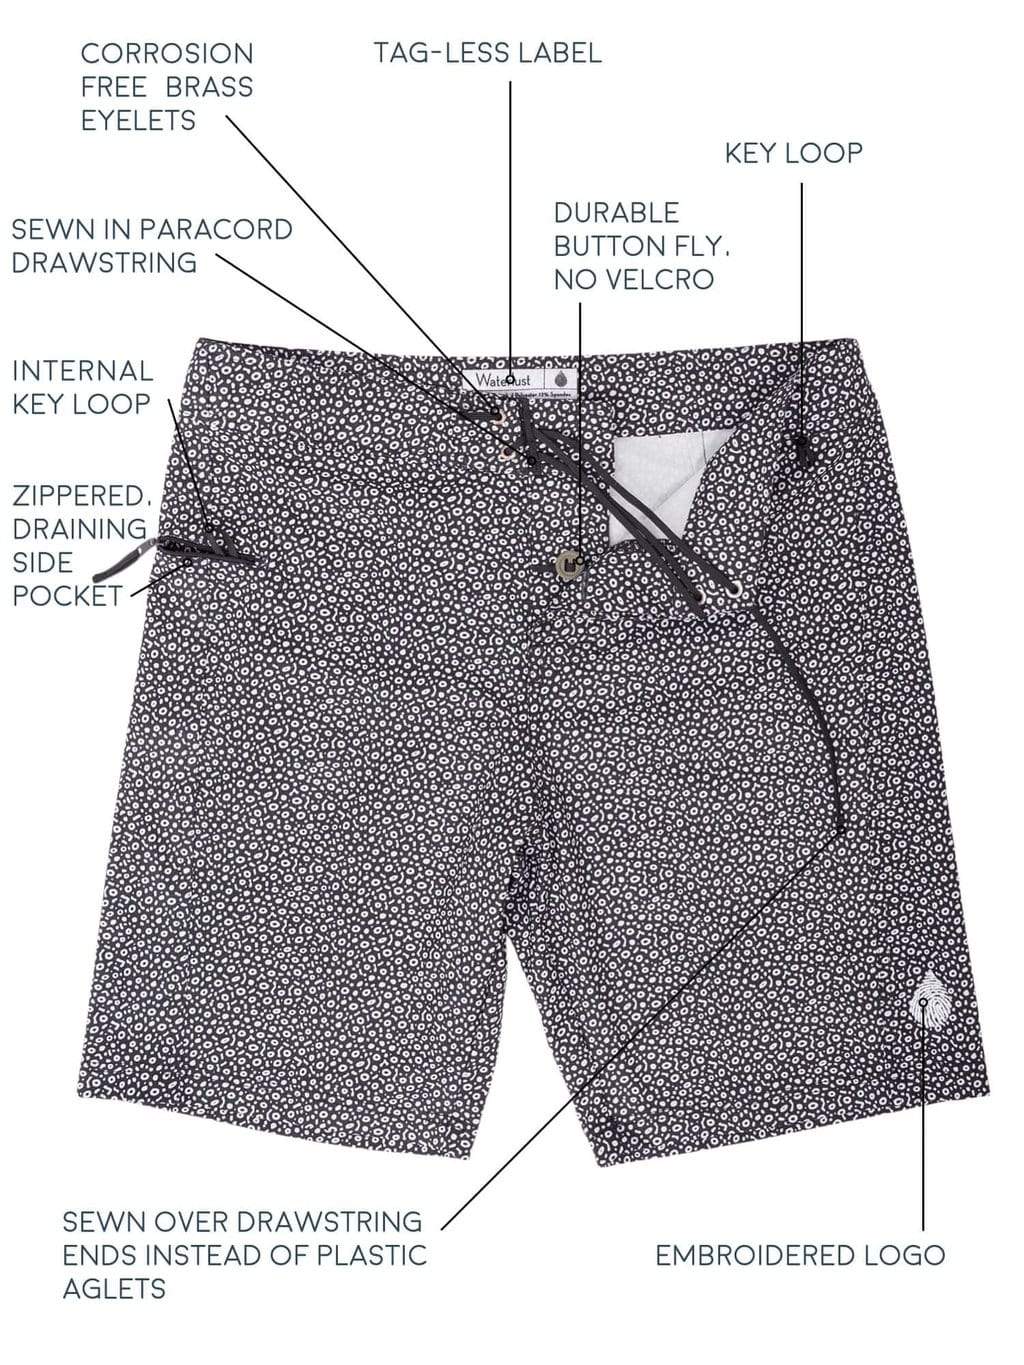 Waterlust Spotted Eagle Ray Boardshorts image showing features